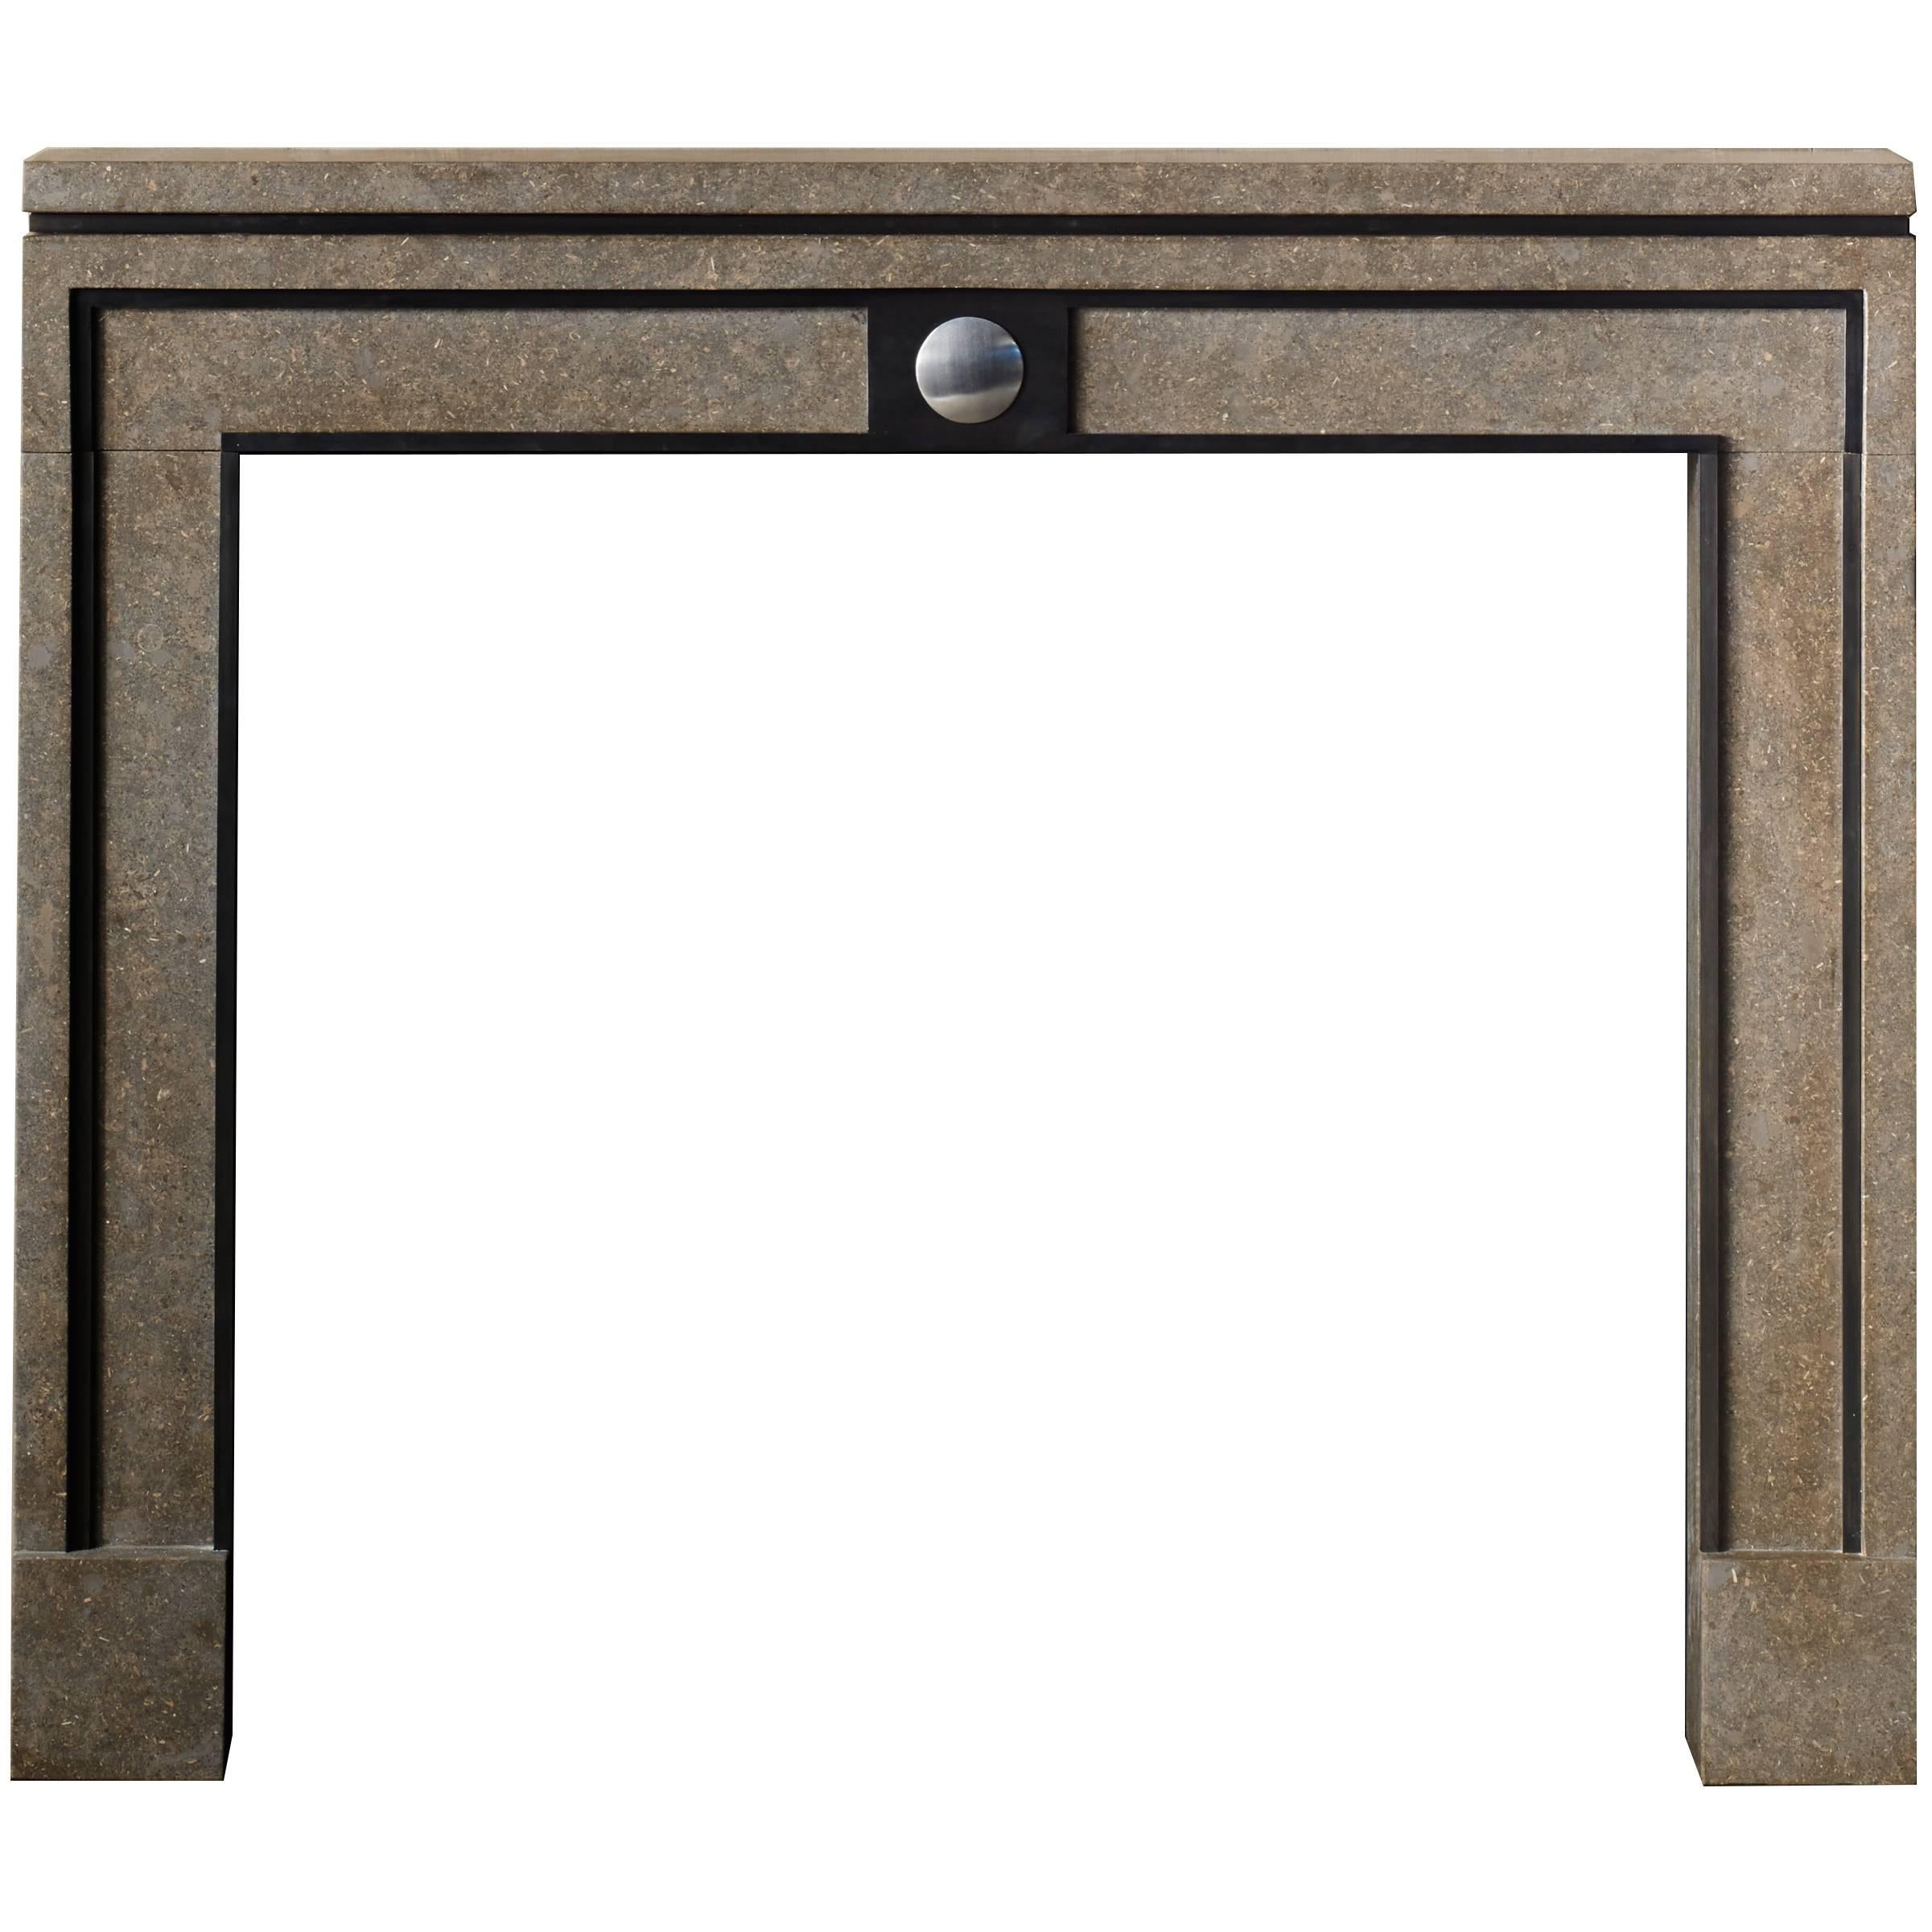 Contemporary Mantel Designed by Eric Cohler in Limestone and Patinated Steel